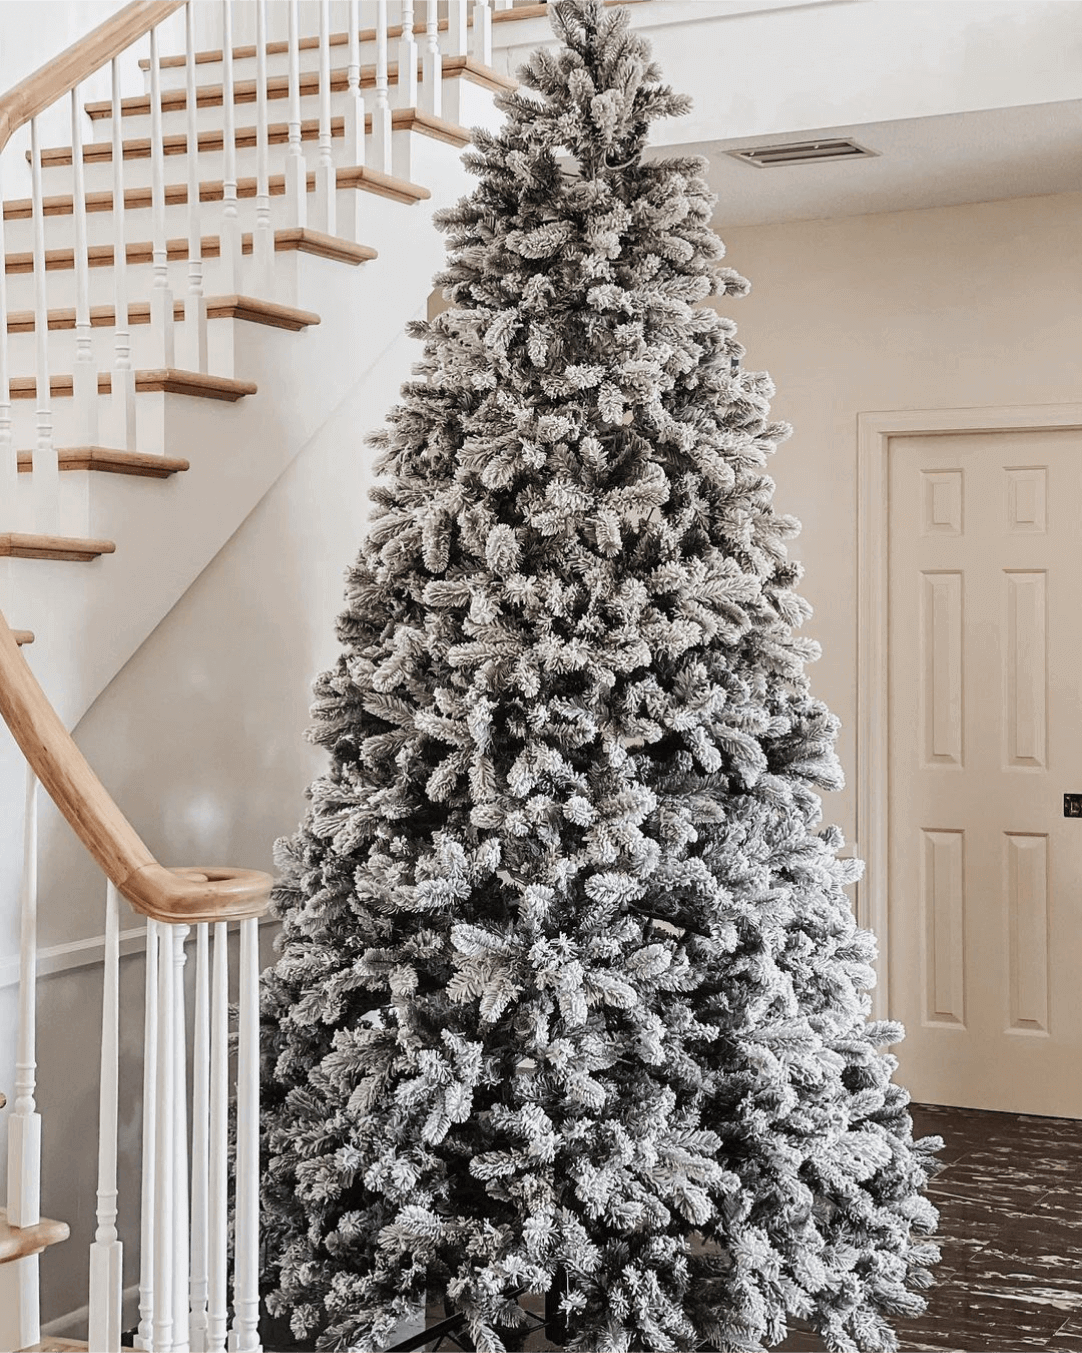 King of Christmas 8' King Flock® Artificial Christmas Tree with 900 with Warm White LED Lights